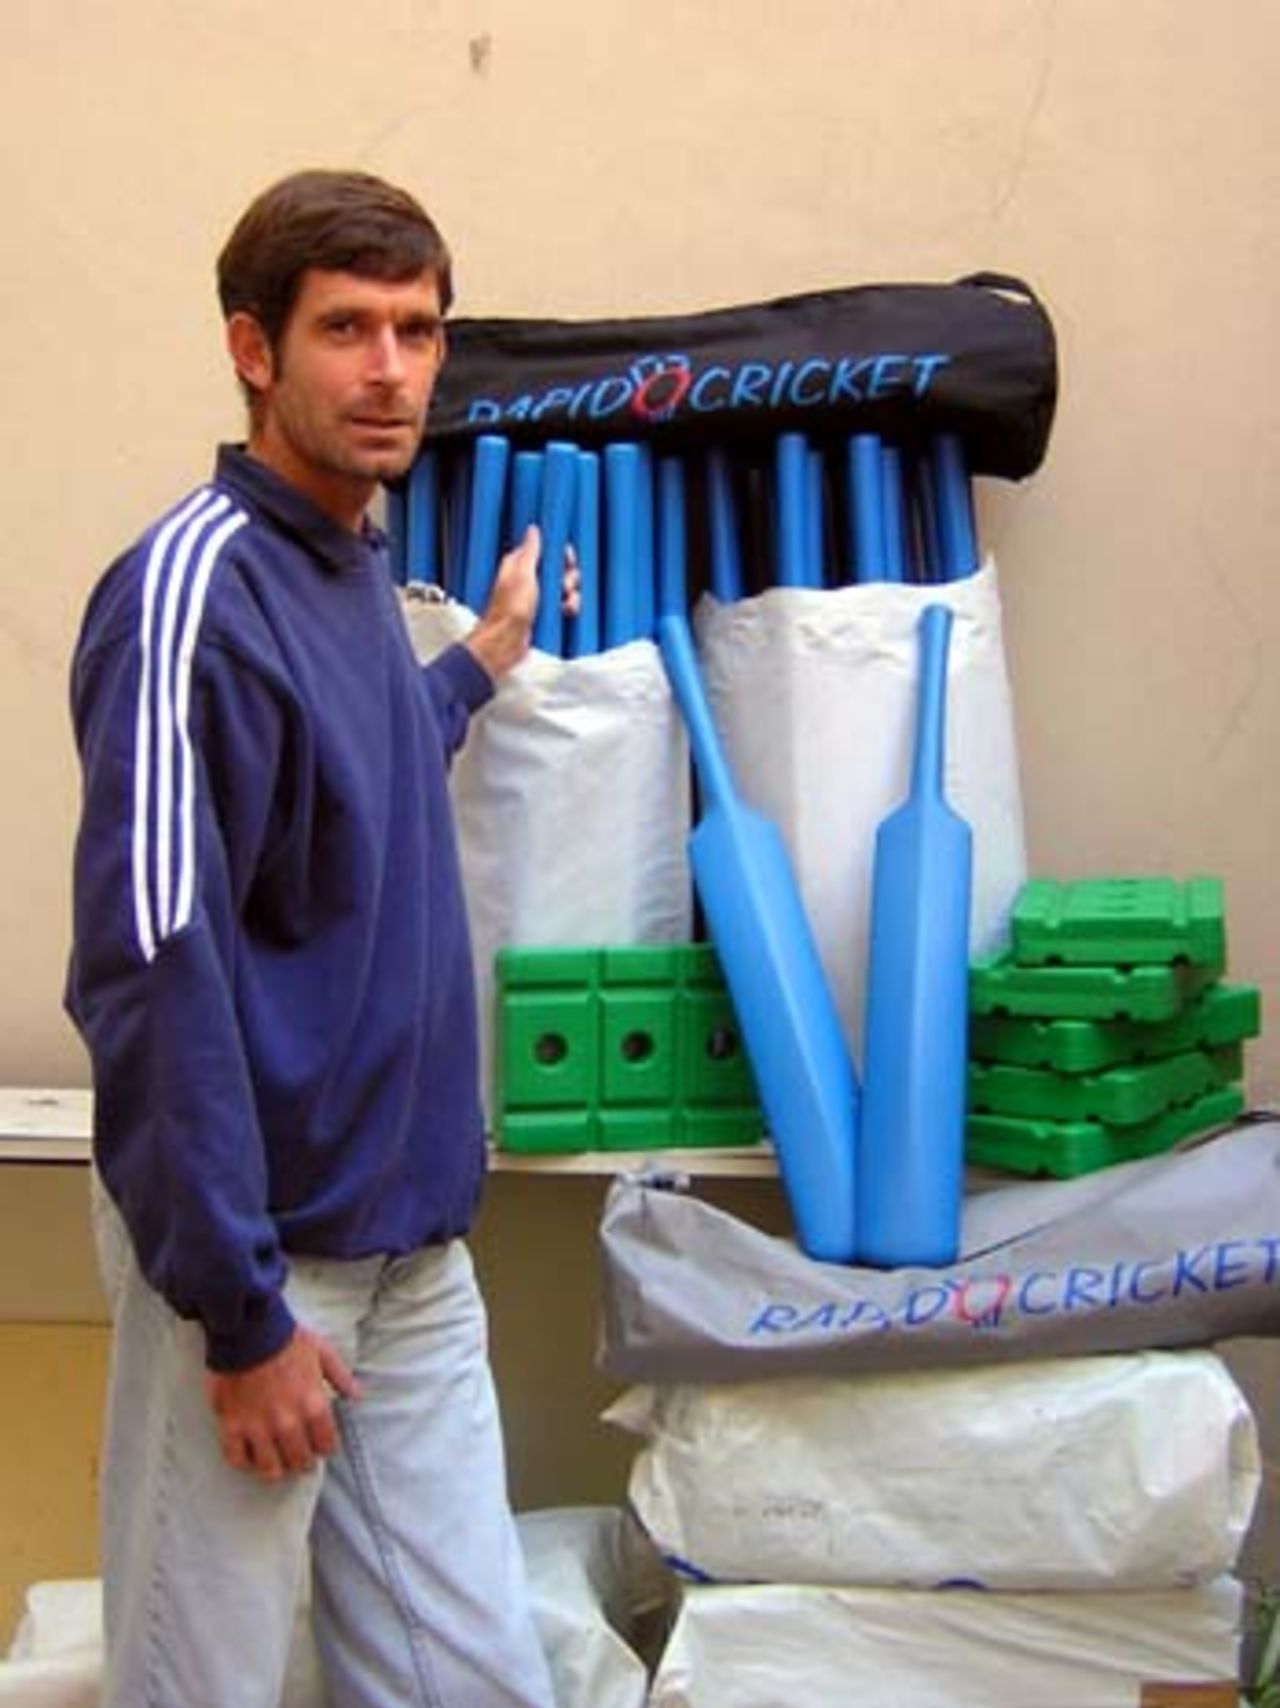 Grant Dugmore with Rapido Cricket Sets